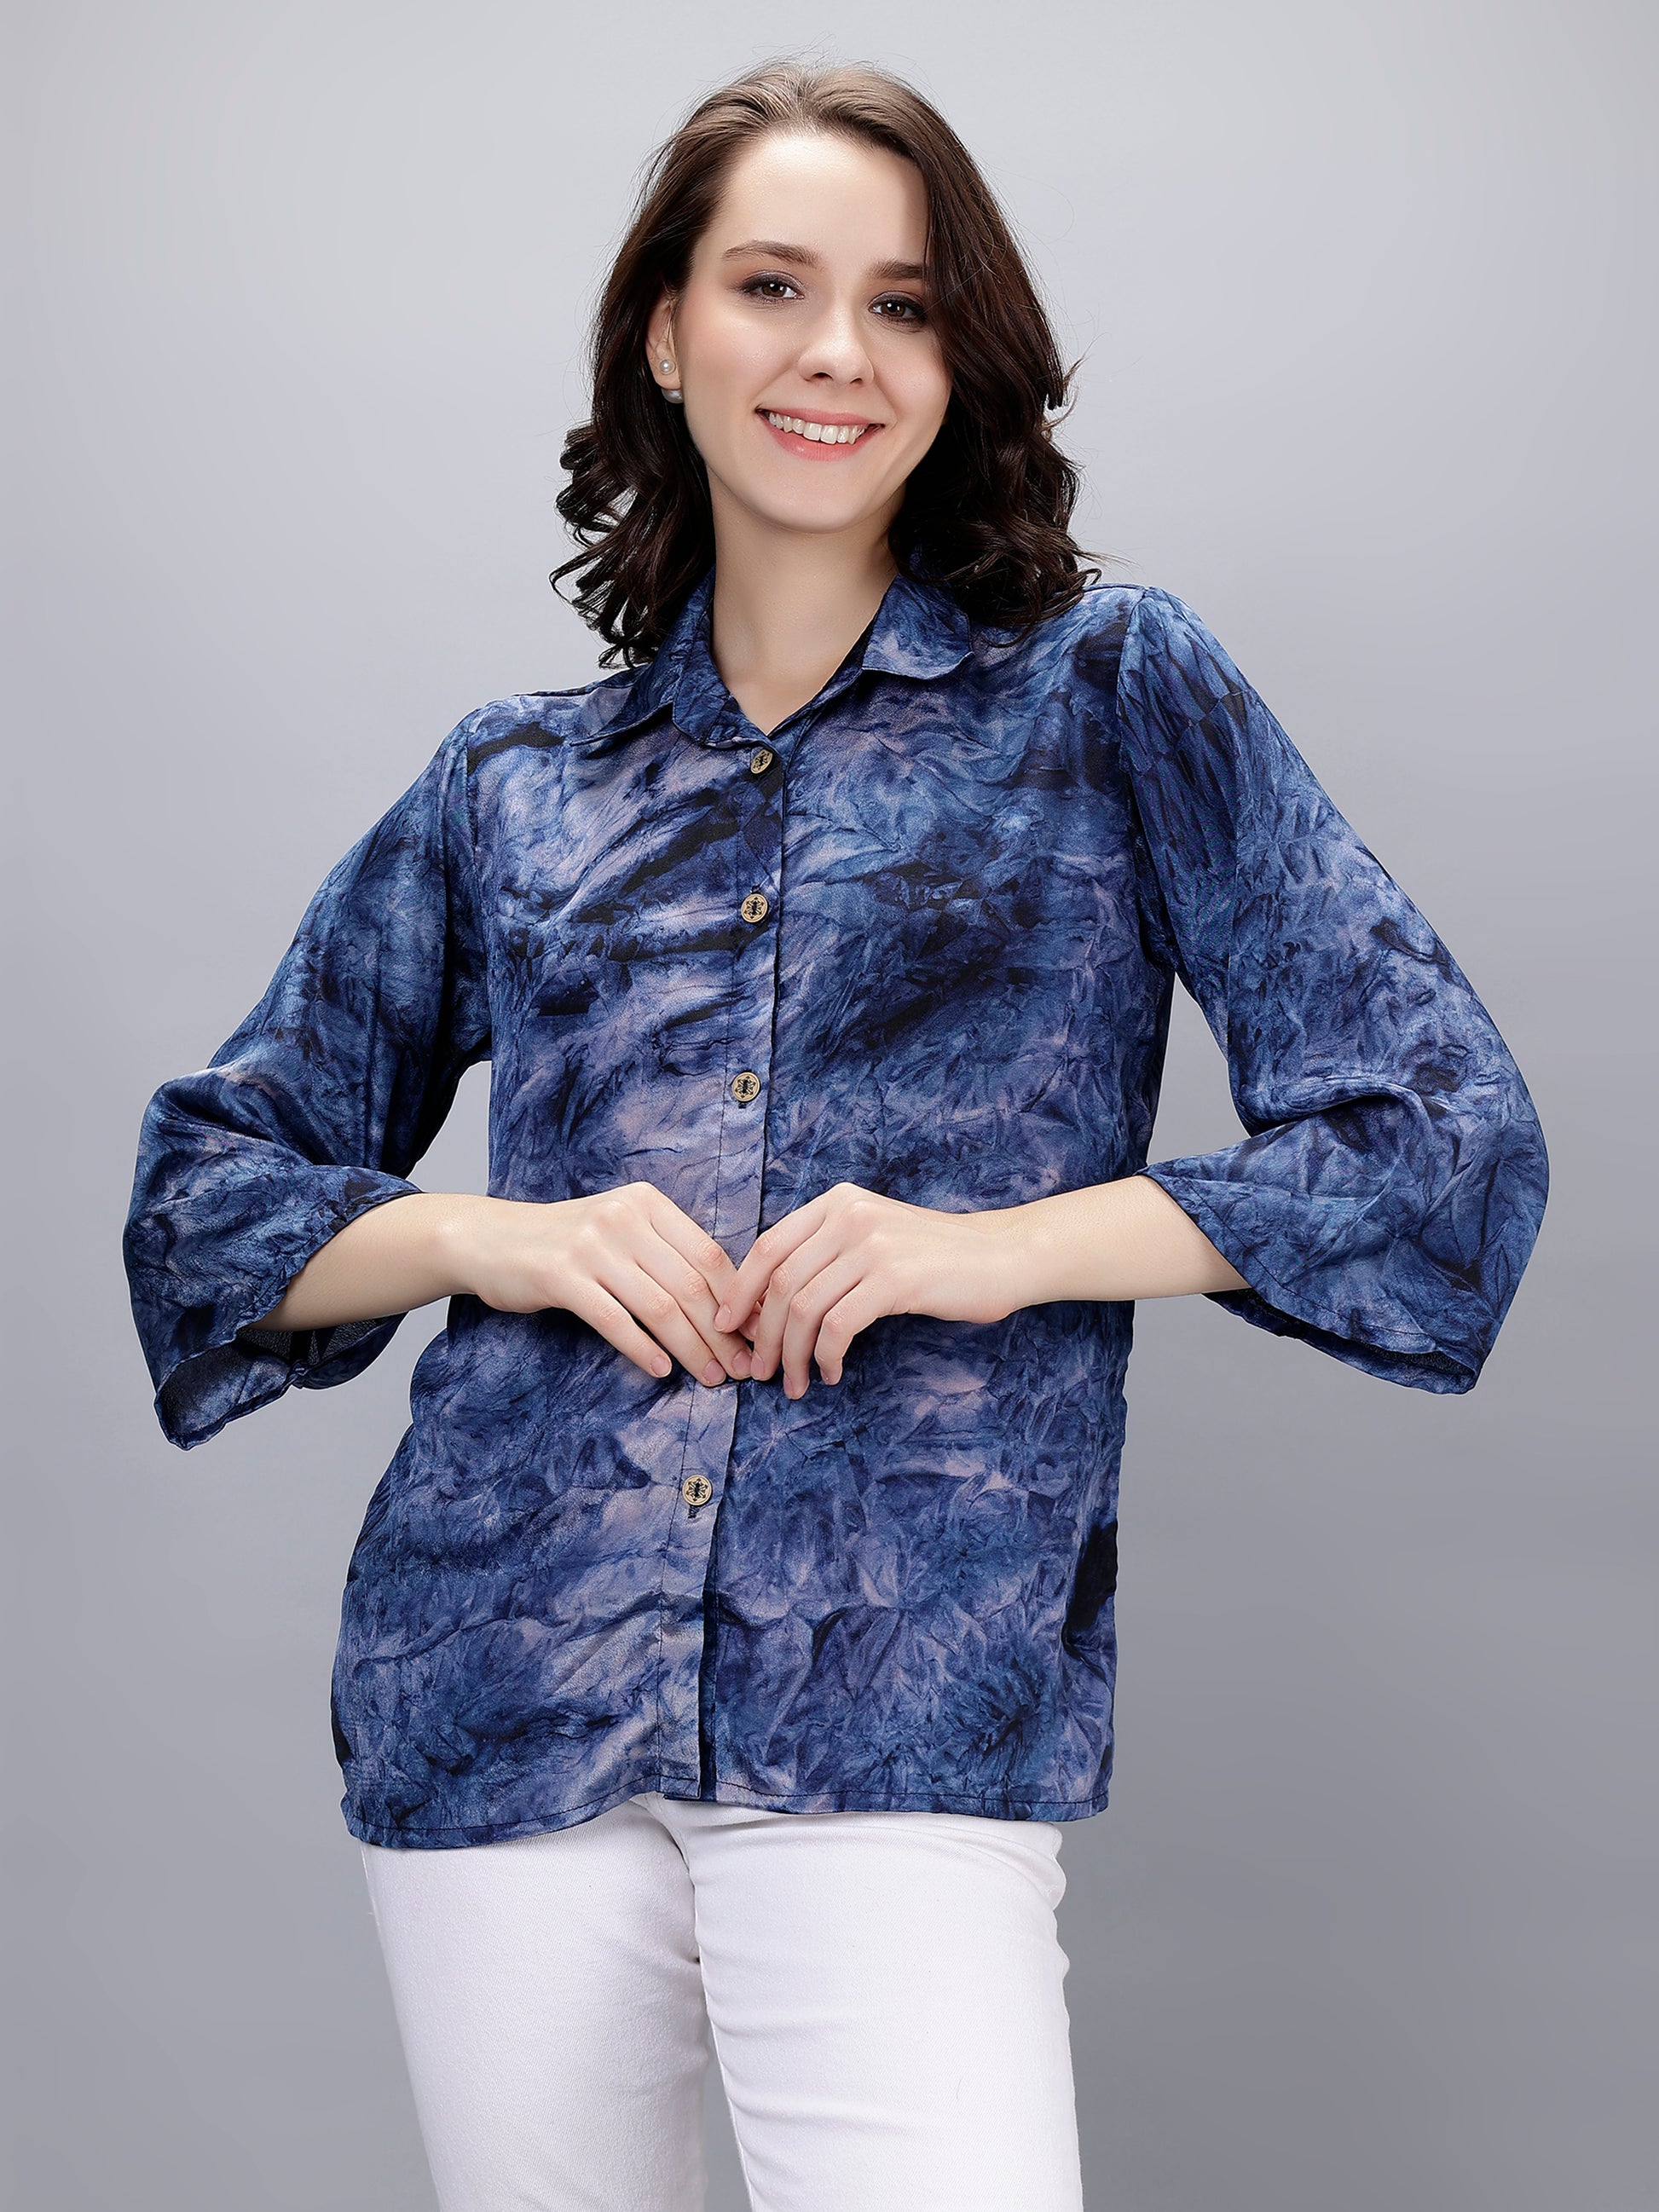 Women casual printed shirt style office wear top 